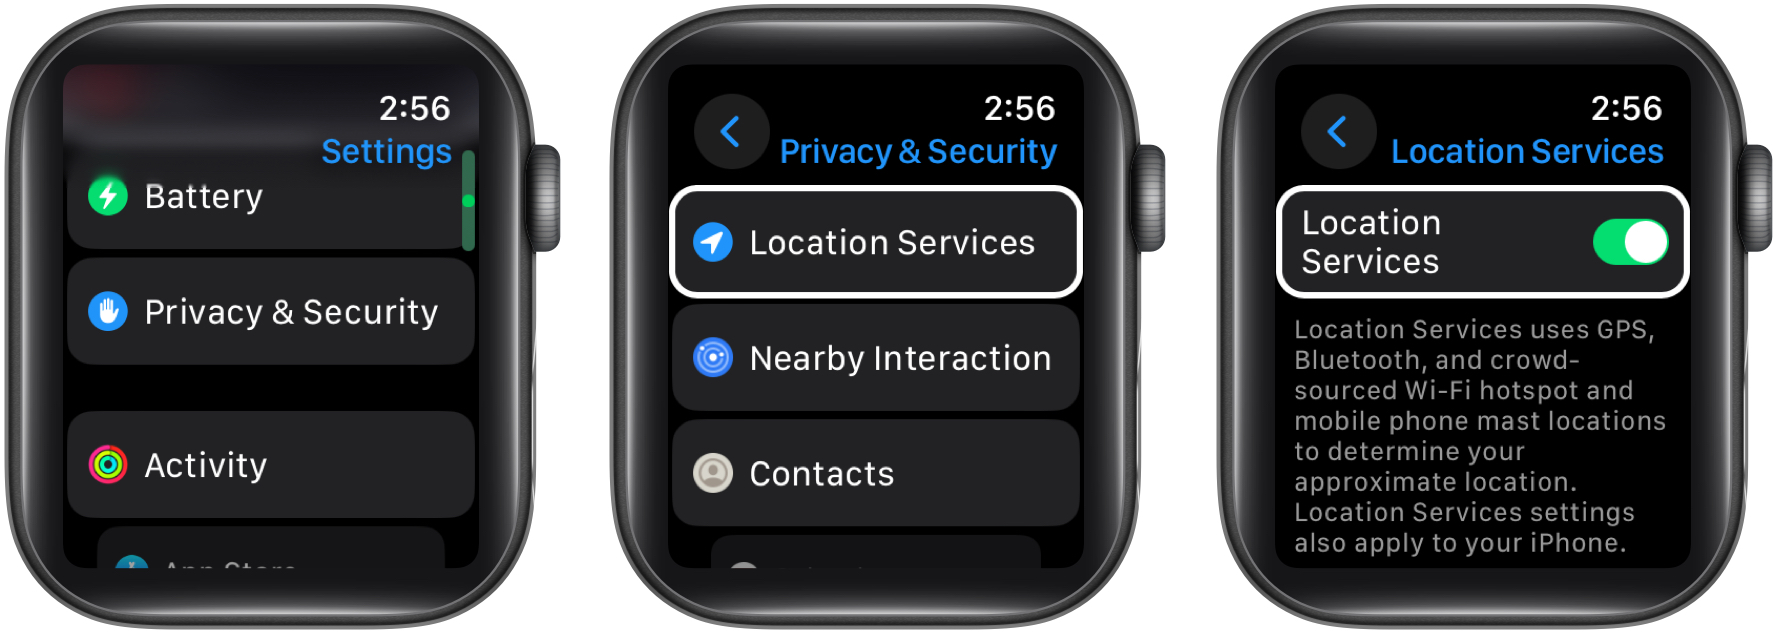 Go to settings, privacy and security, enable location services on apple watch